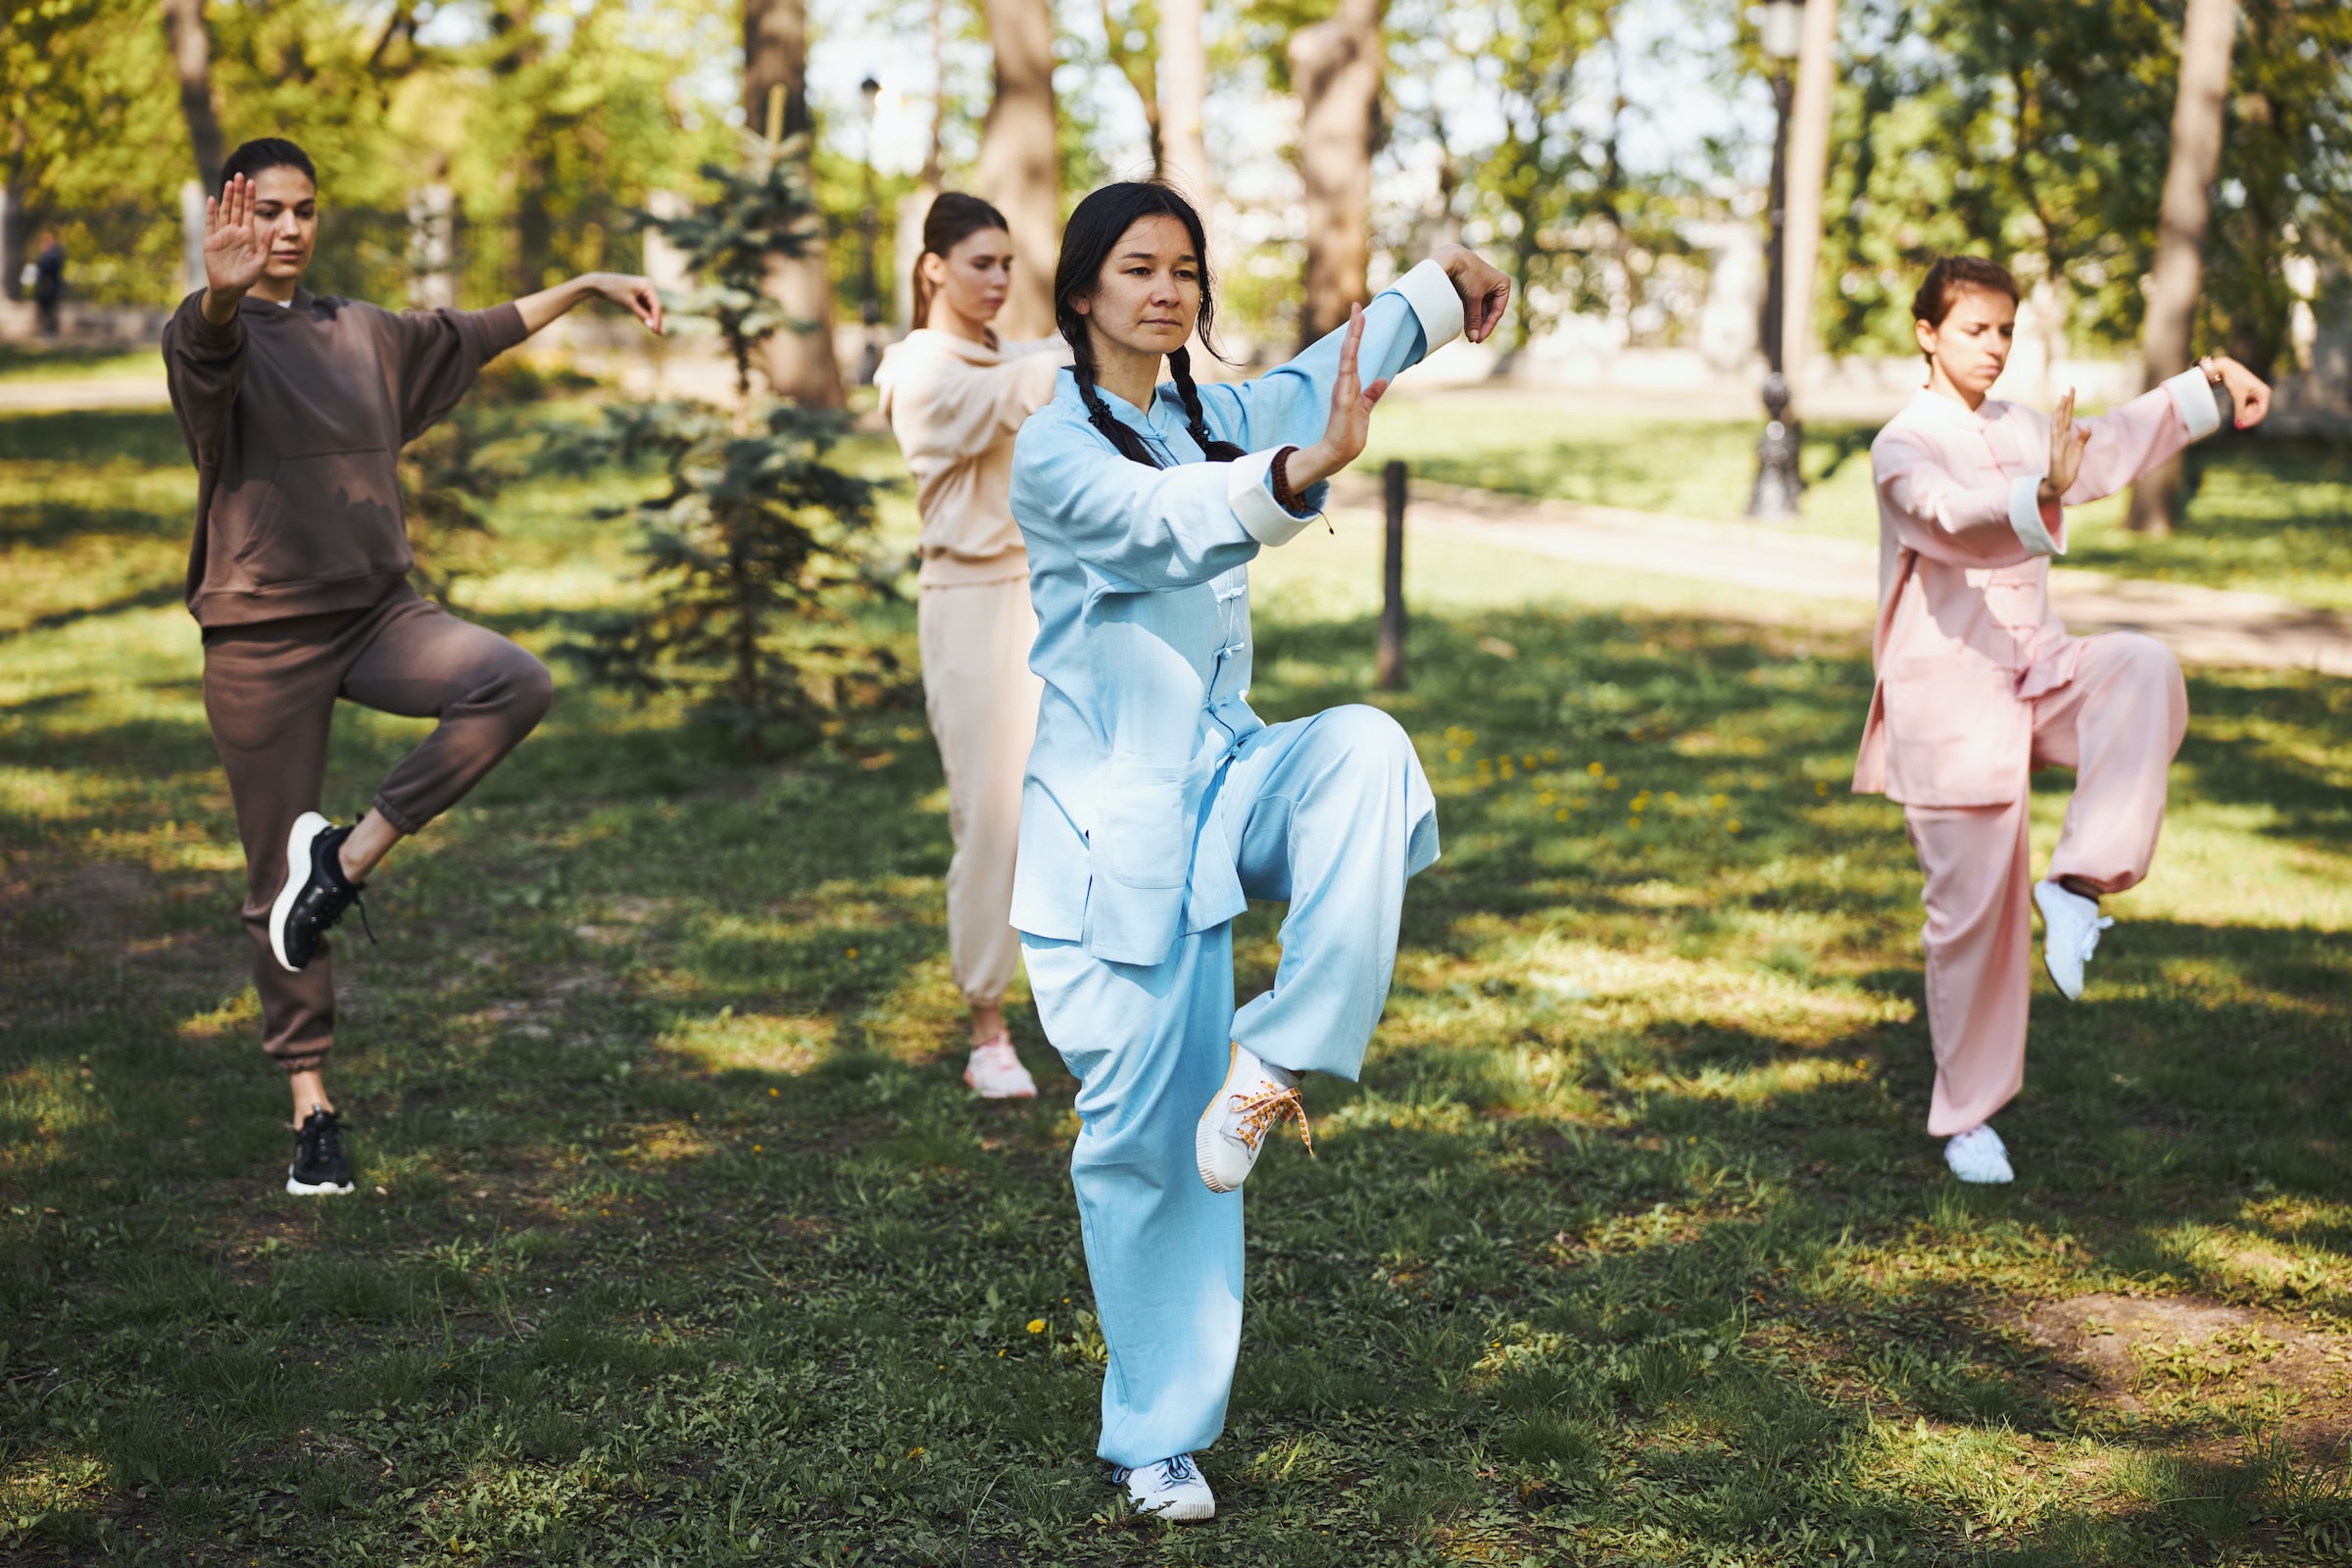 Four people practice Tai Chi in a park